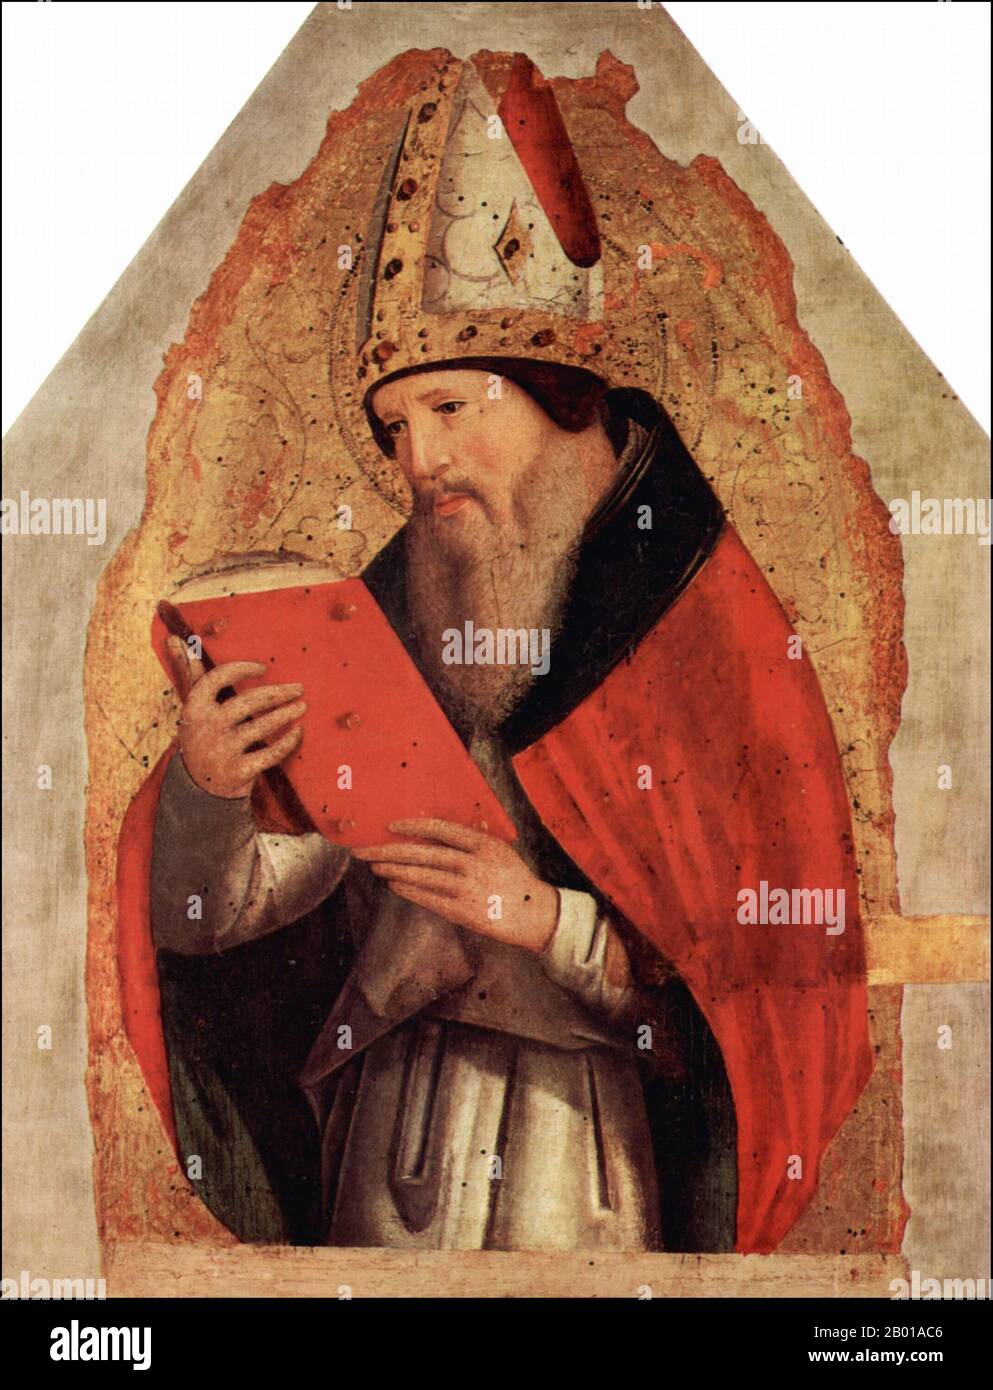 Algeria: Saint Augustine of Hippo Regius (13 November 354 - 28 August 430). Tempera on panel painting by Antonello da Messina (c. 1430-1479), 1473.  Augustine of Hippo (Aurelius Augustinus Hipponensis), also known as Augustine, St. Augustine, St. Austin, St. Augoustinos, Blessed Augustine or St. Augustine the Blessed, was Bishop of Hippo Regius, the present-day Annaba, Algeria. He was a Latin-speaking philosopher and theologian who lived in the Roman Africa Province. His writings were very influential in the development of Western Christianity. Stock Photo